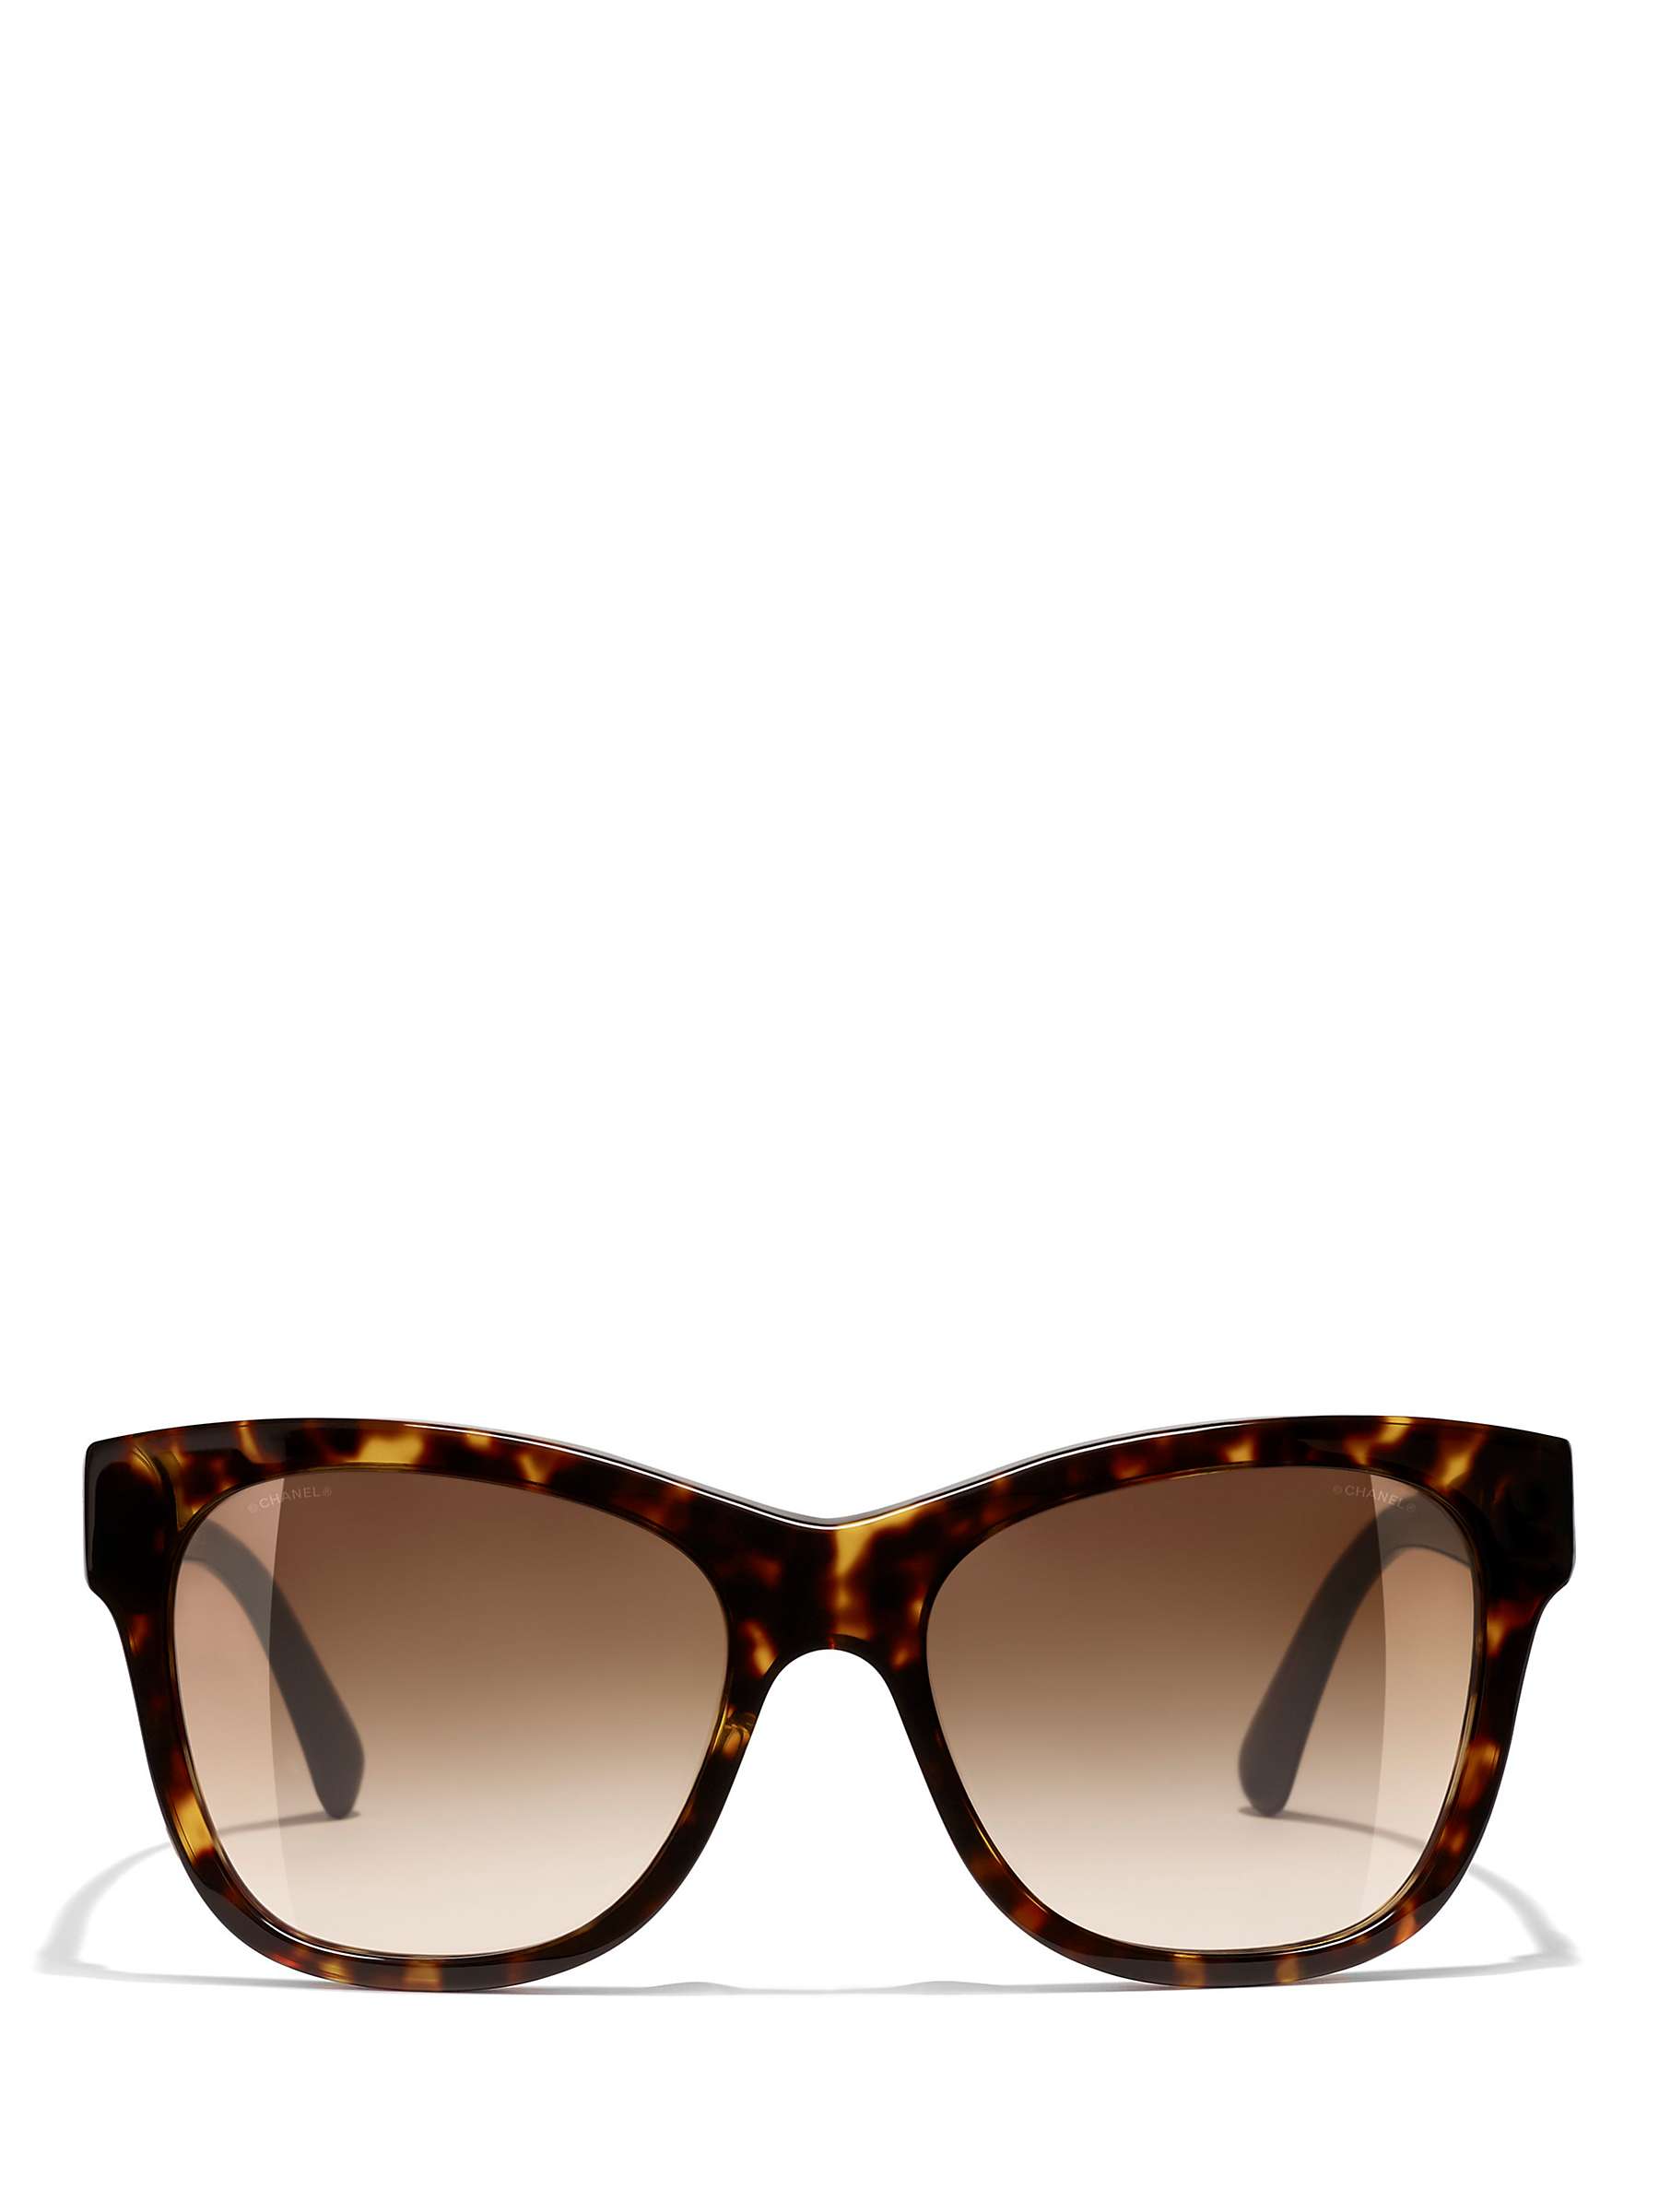 Buy CHANEL Square Sunglasses CH5380 Tortoise/Brown Gradient Online at johnlewis.com